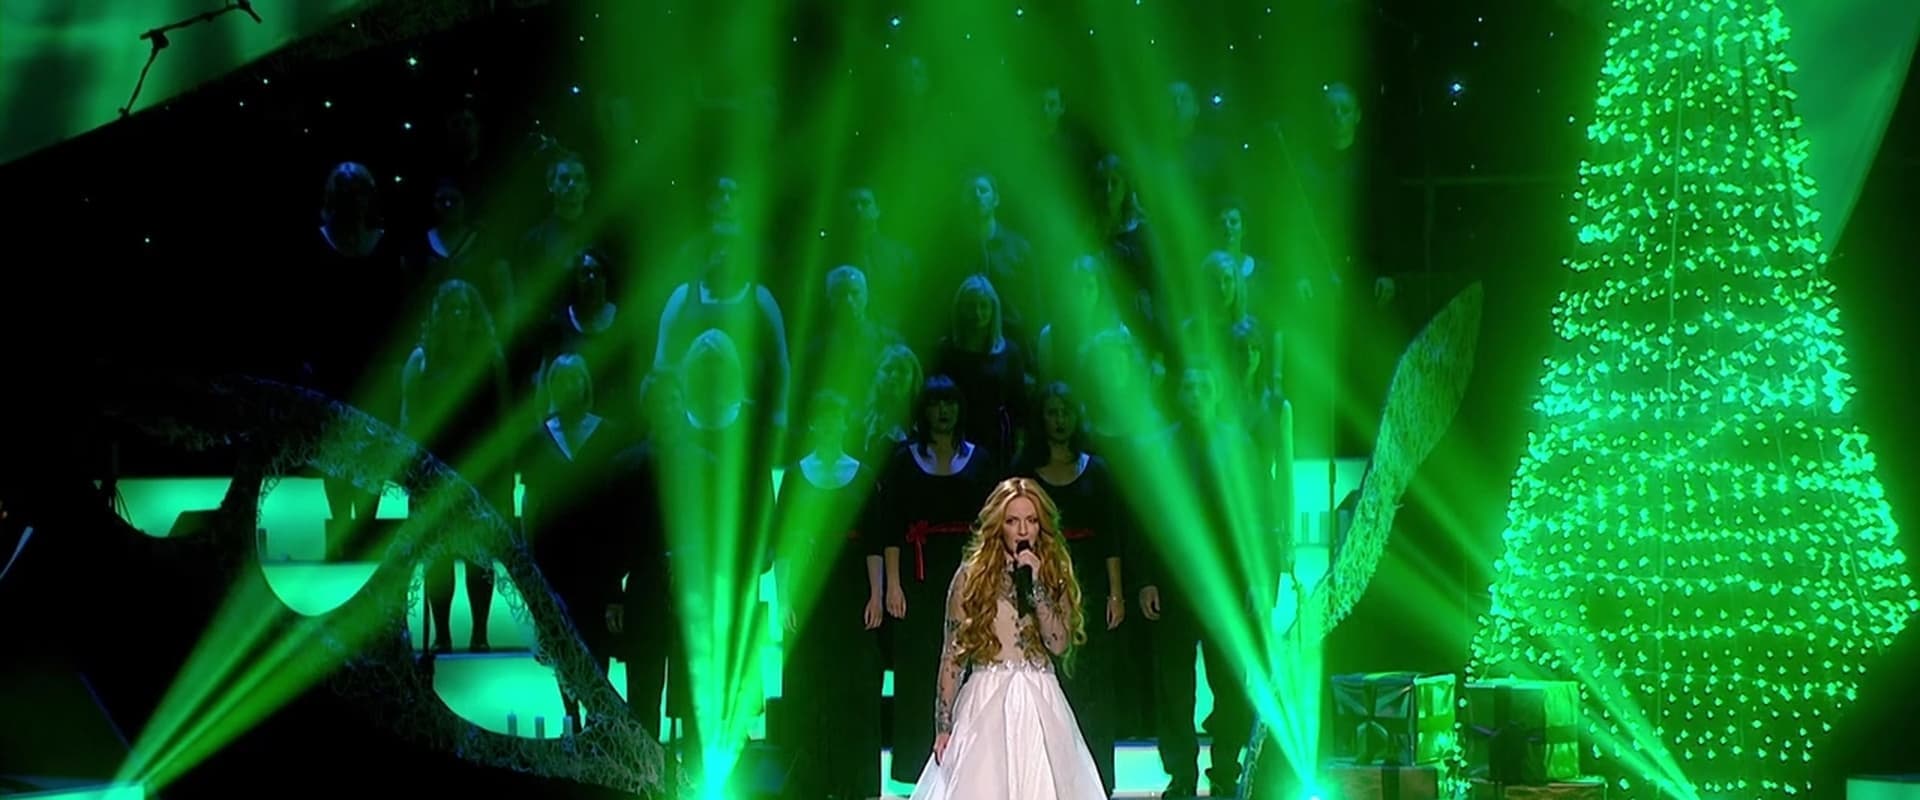 Celtic Woman: Home for Christmas, Live from Dublin